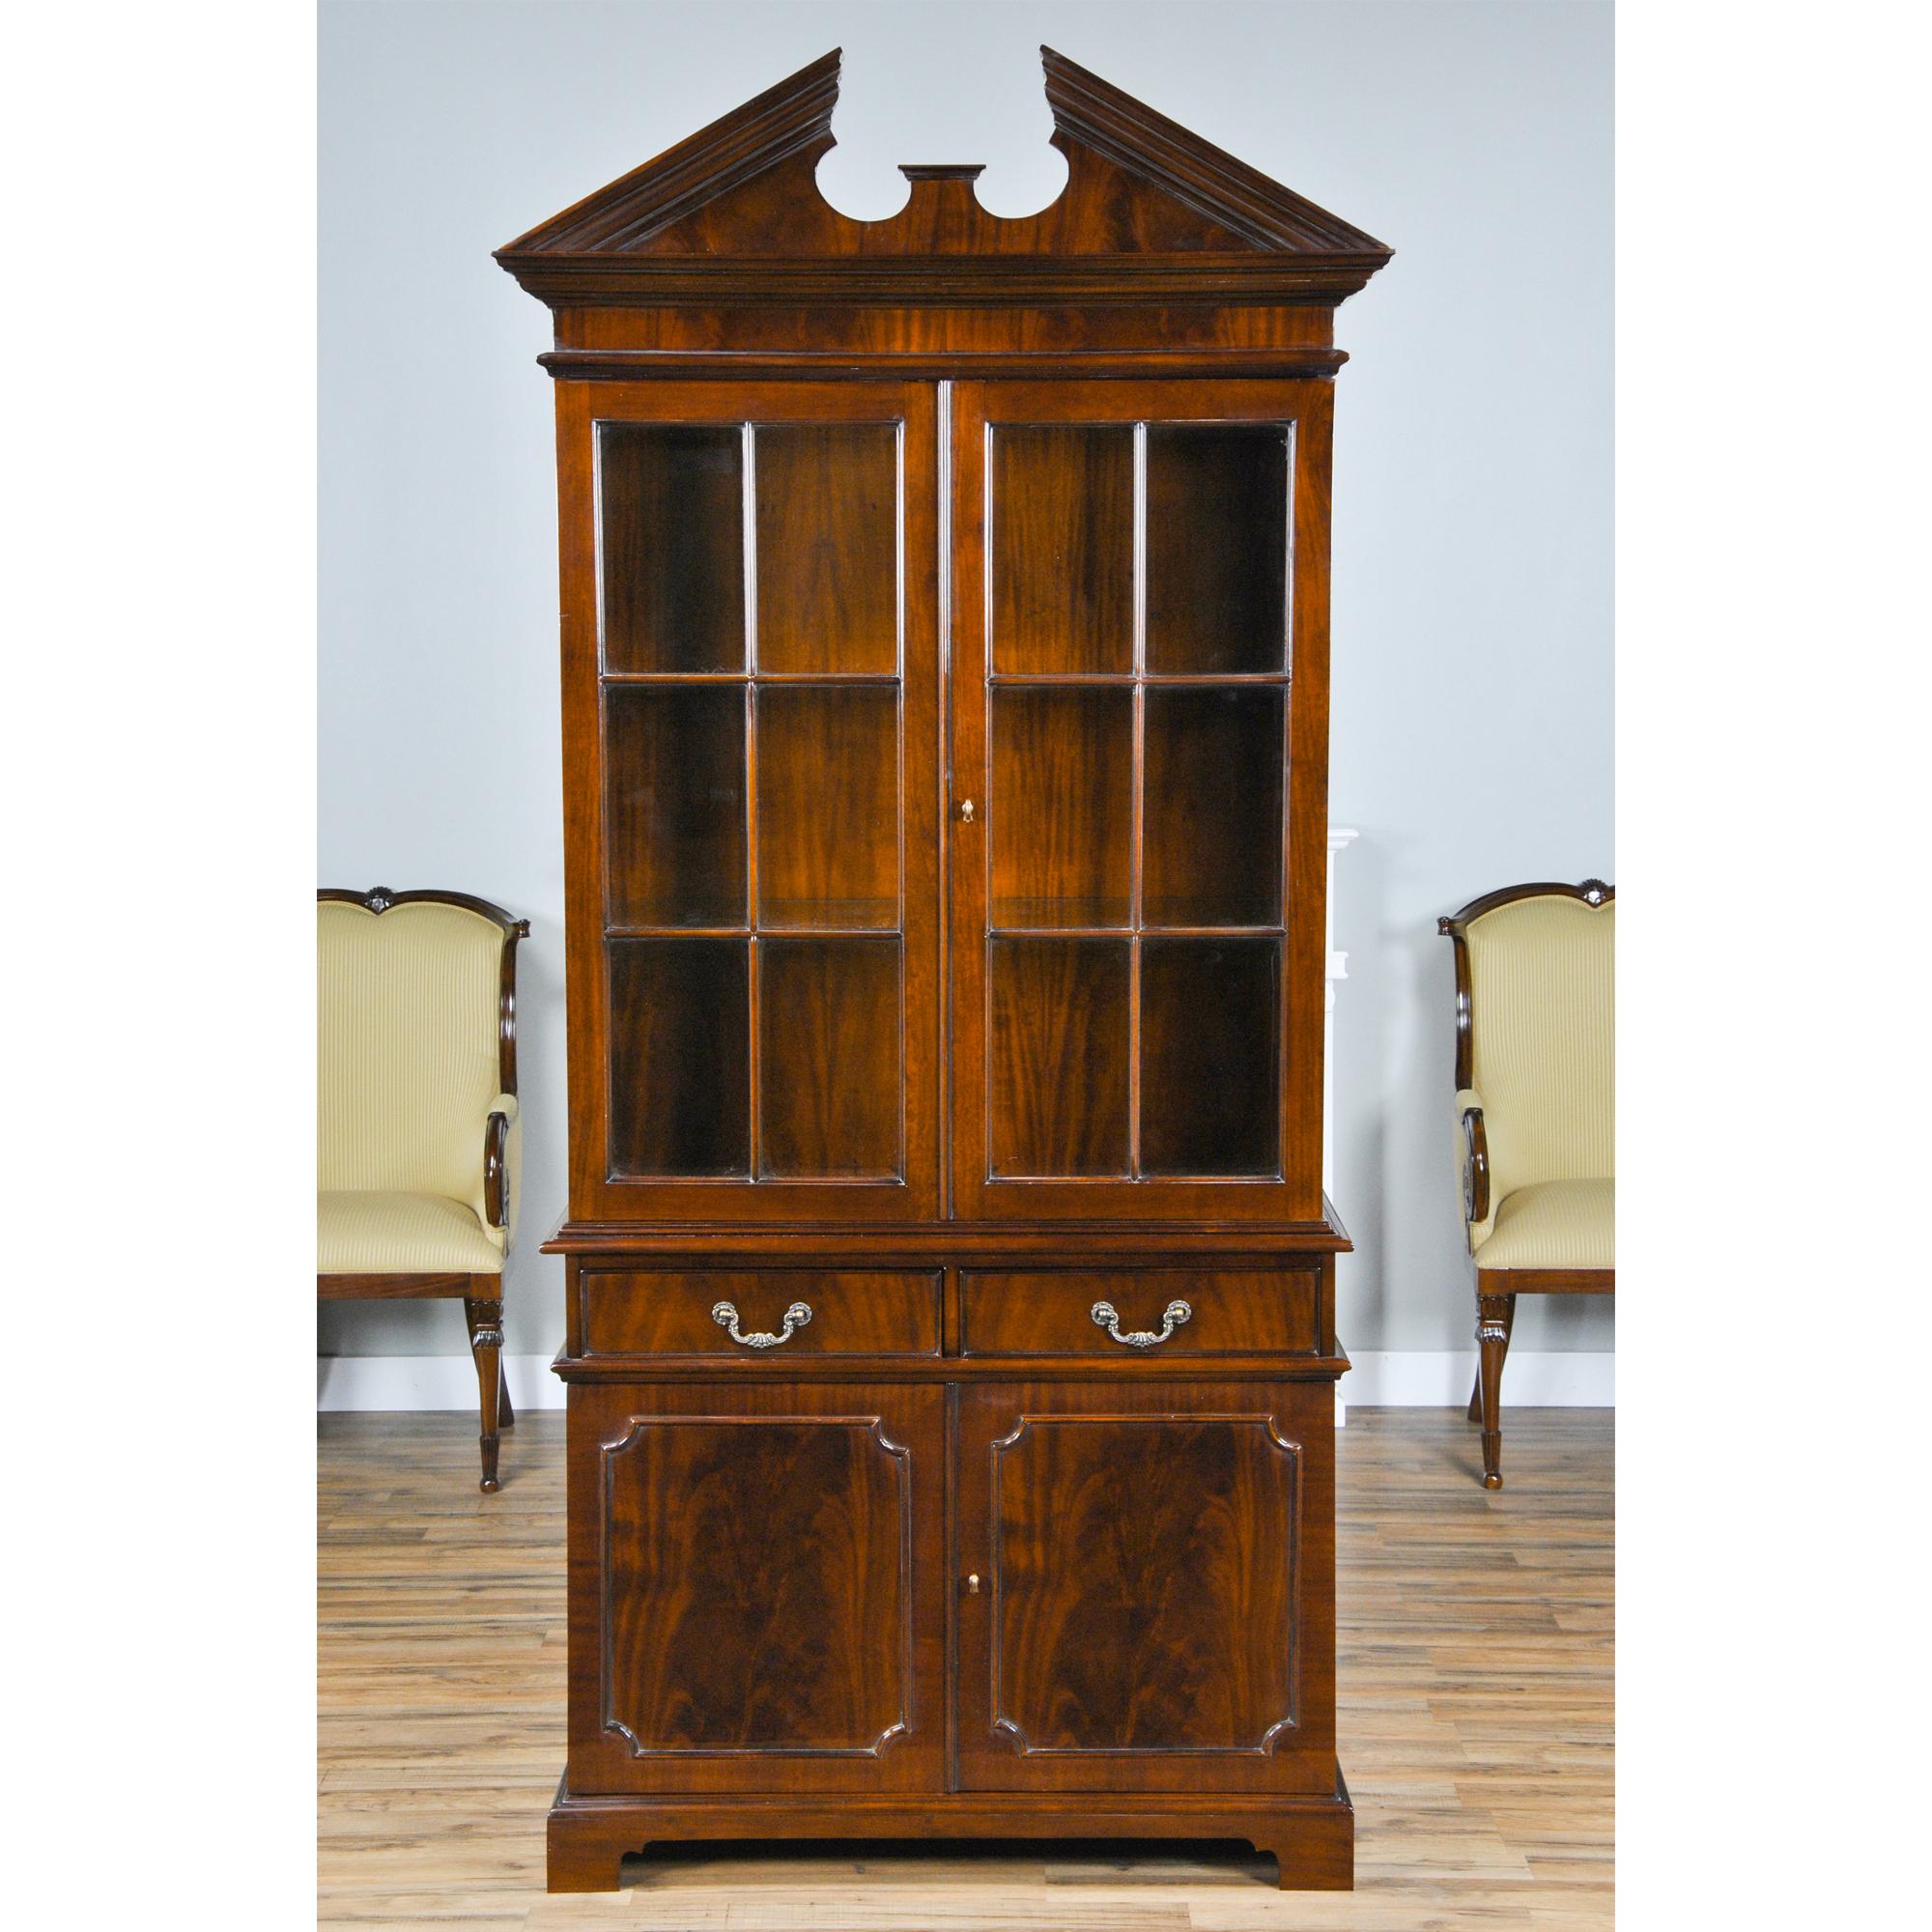 Ideal for narrow spaces this Two Door Mahogany China Closet can fit when our larger cabinets cannot make it between a set of doorways, windows, radiators, etc. Thick glass shelves in the upper section allow light to penetrate and help show off your